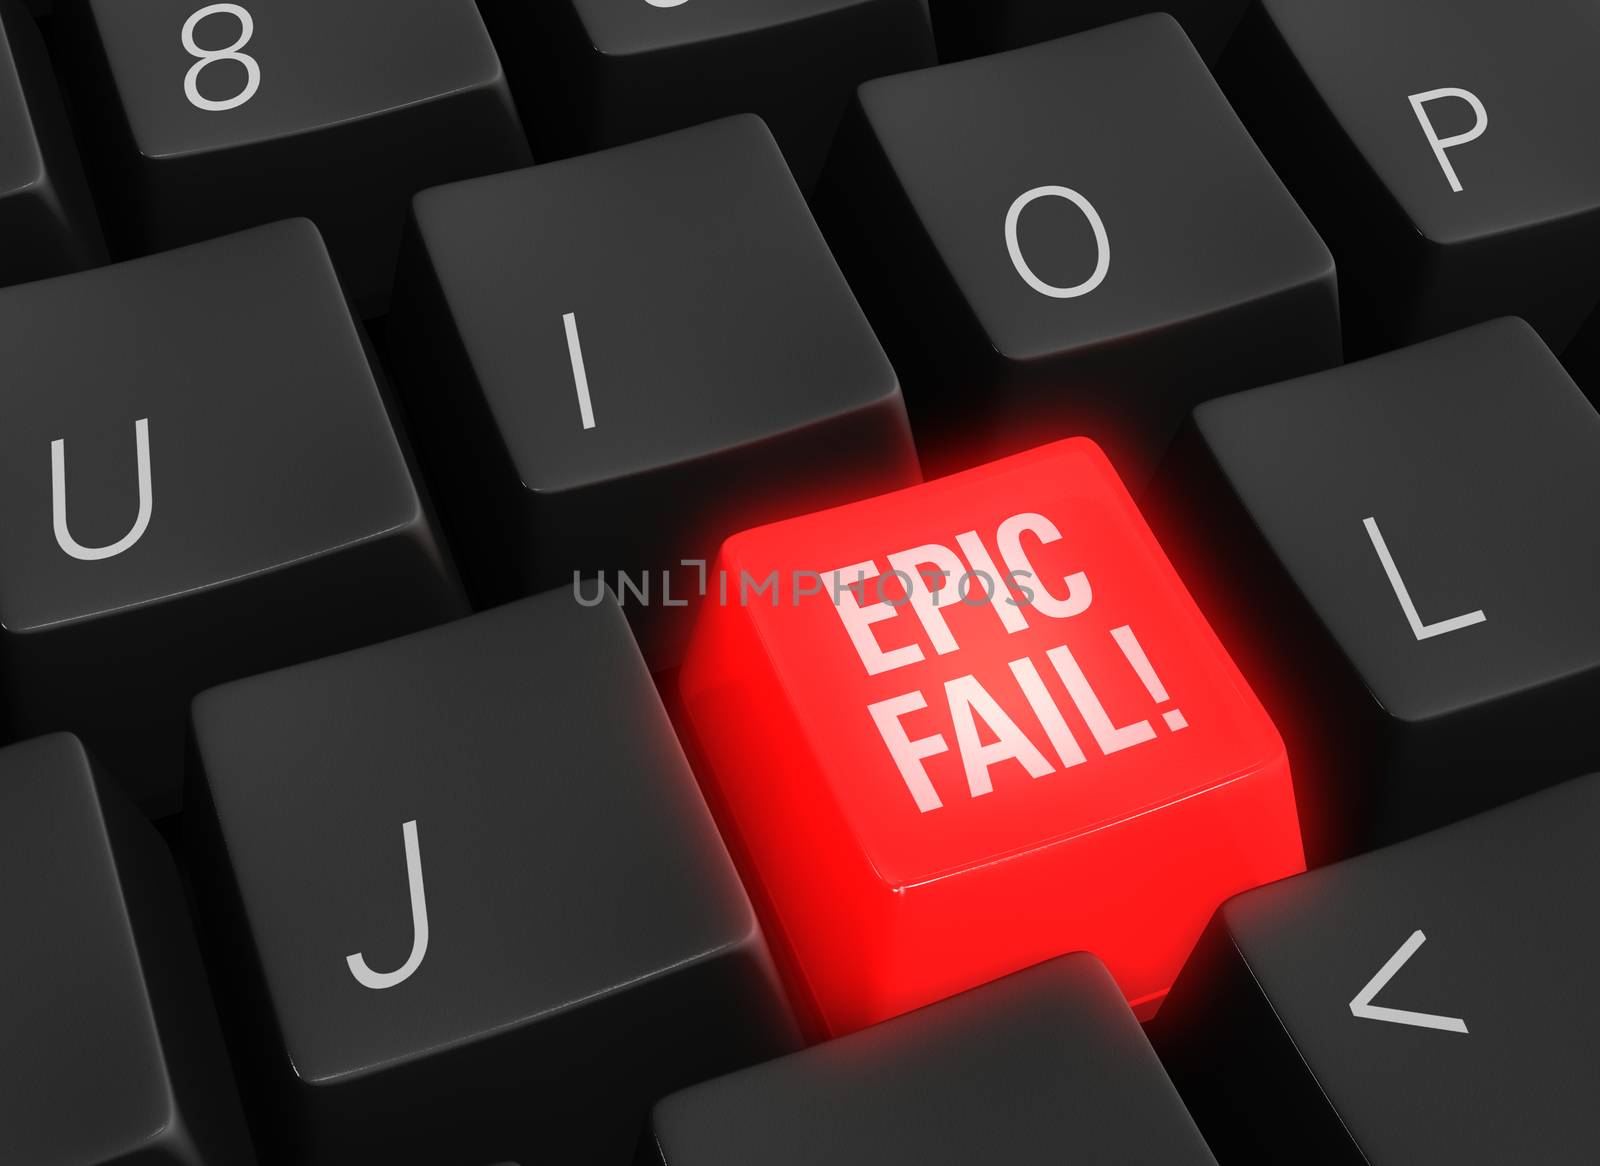 Close up photo-real illustration of a black computer keyboard with a glowing red "EPIC FAIL" key.